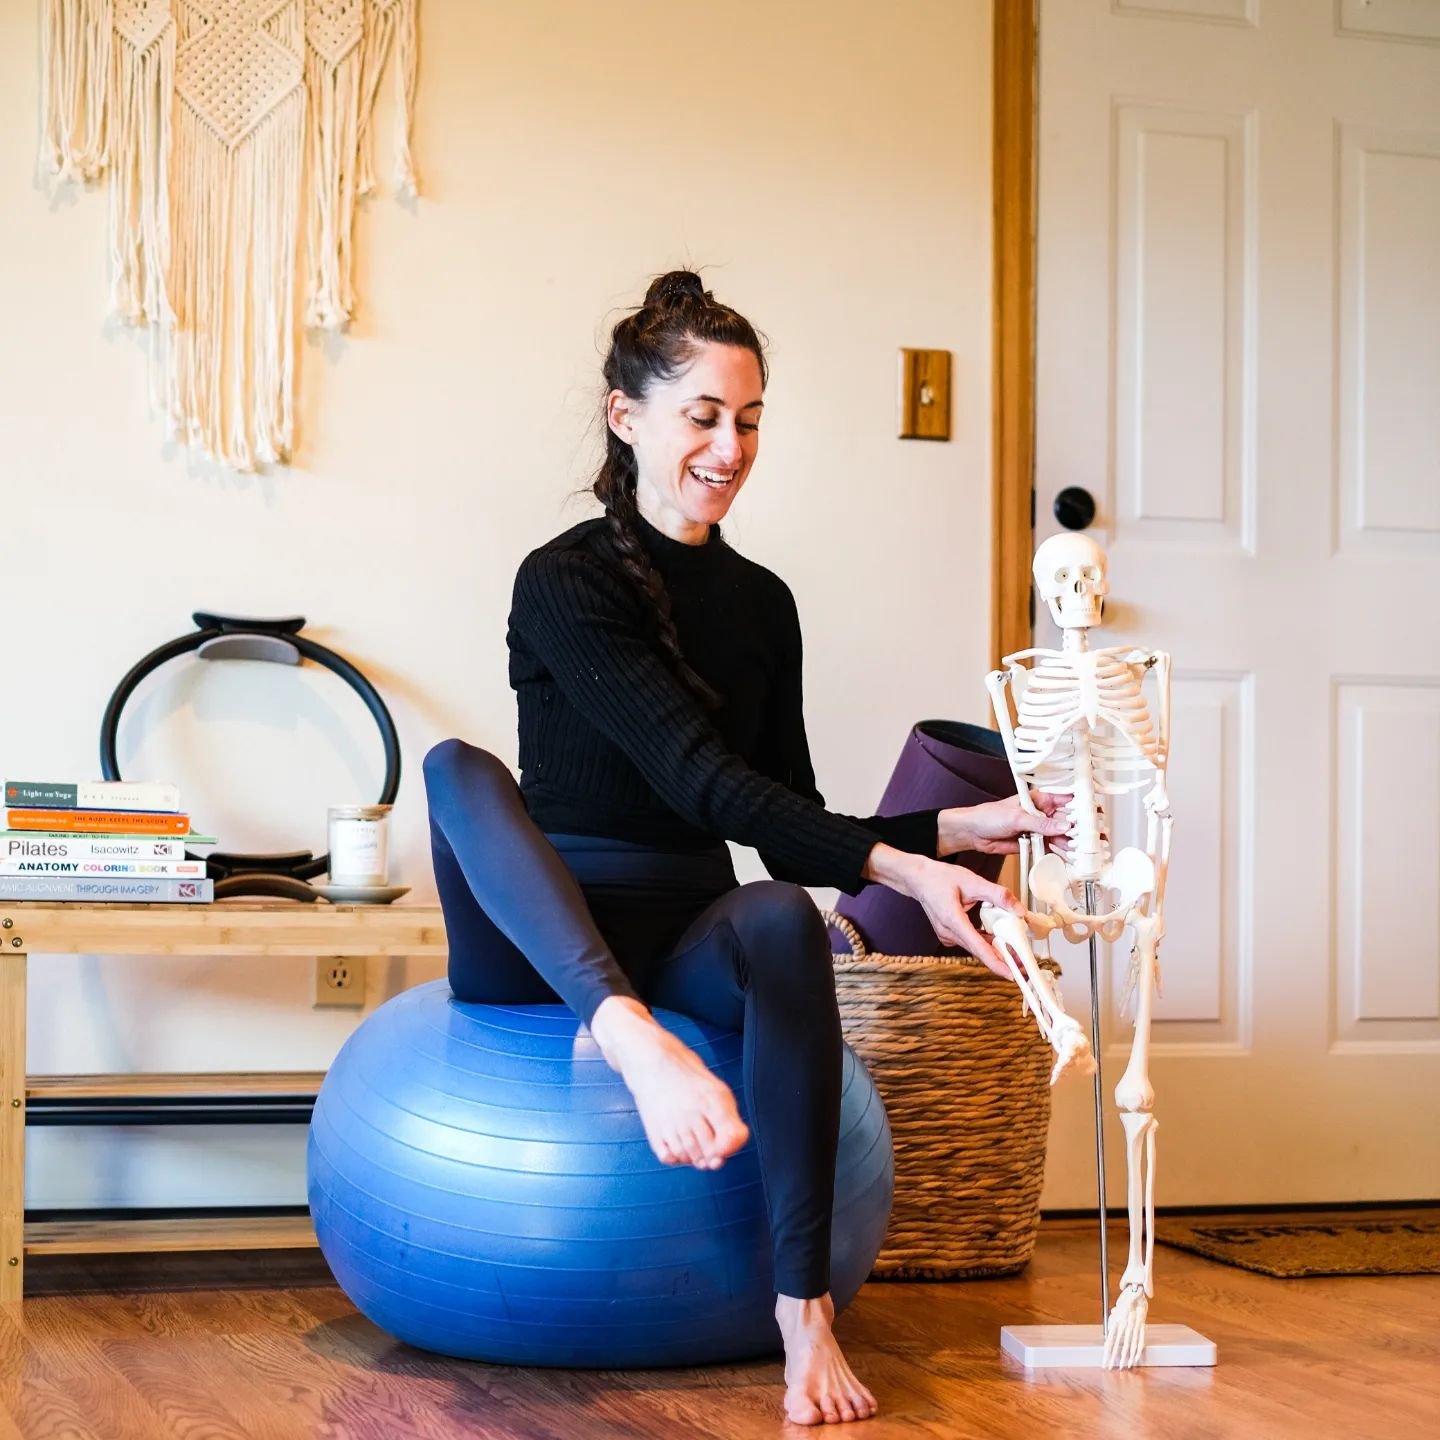 Learning the anatomy of breathing, significantly improved the way I breathe. And then understating how I can align my body to support my breath, has been, and still is, fascinating. 
That's why I decided to host this workshop: Breath and Posture, to 